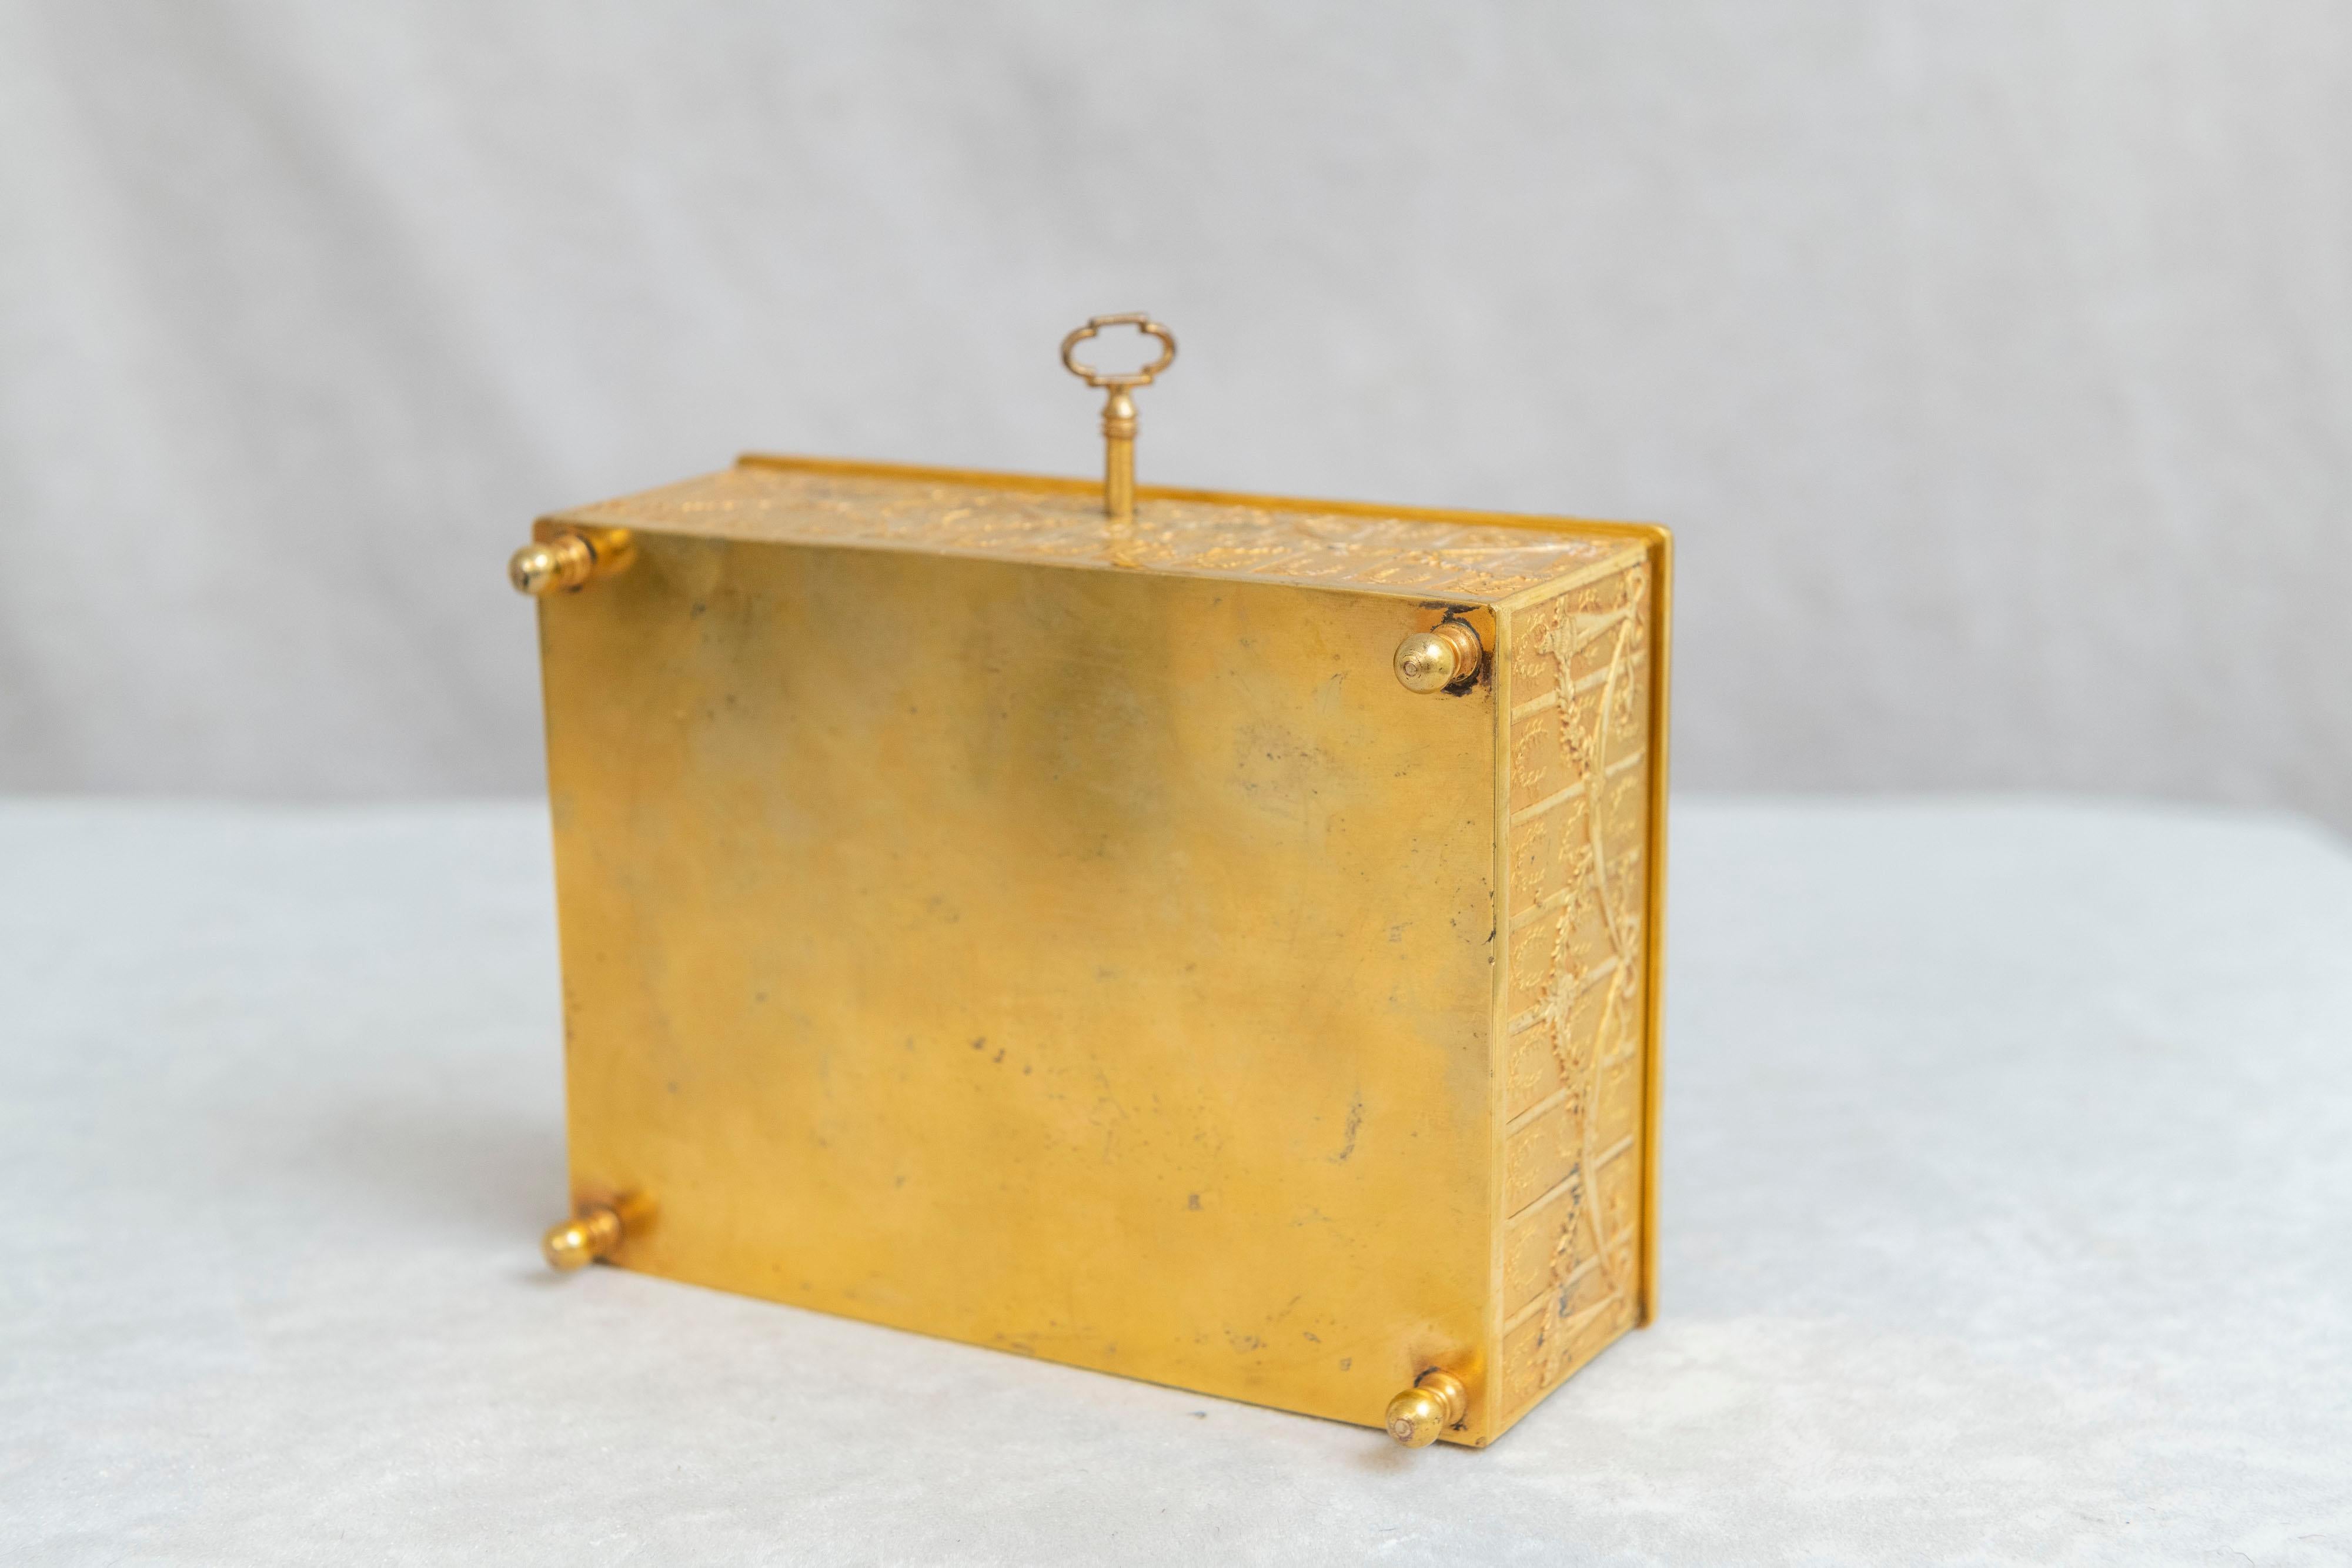 French Gilt Bronze Jewelry Box circa 1900 with Original Key Neoclassical Revival 5